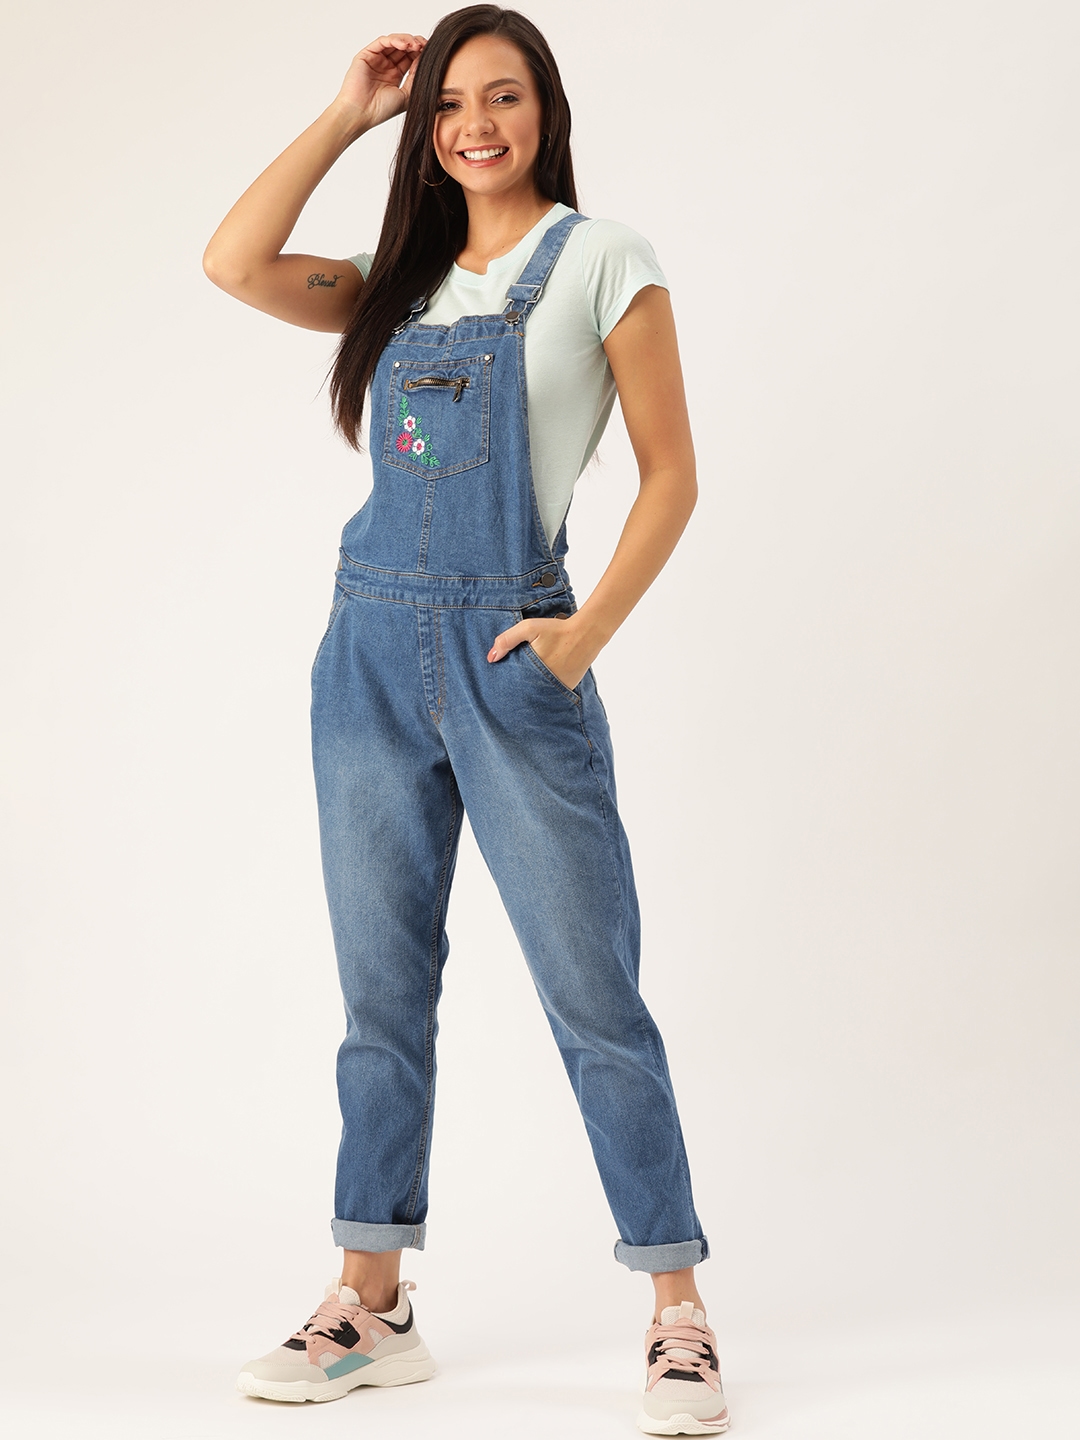 Collection more than 99 womens denim dungarees